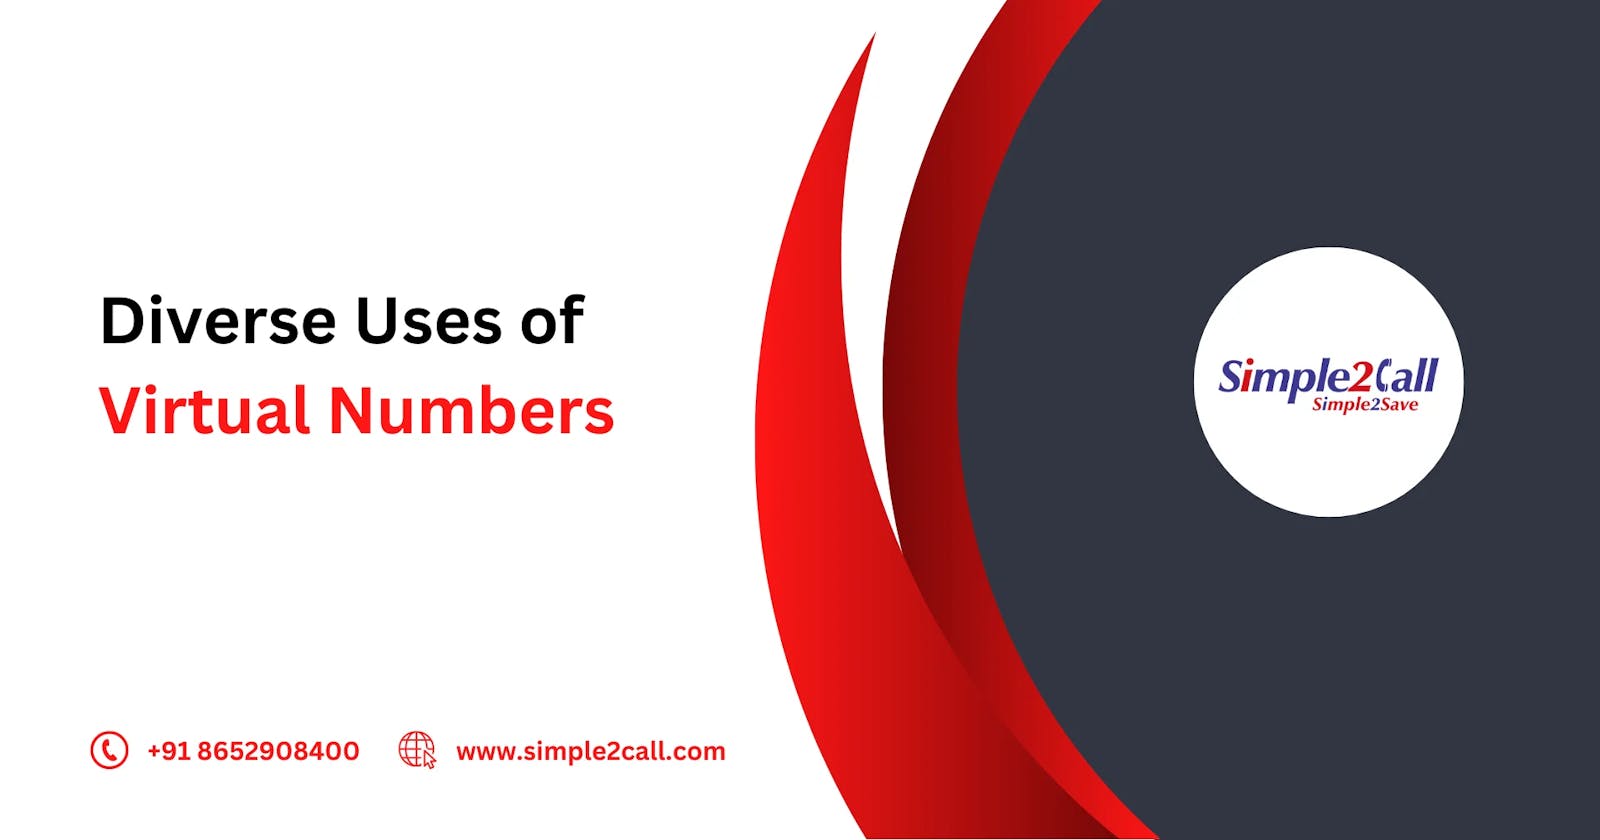 Diverse Uses of Virtual Numbers